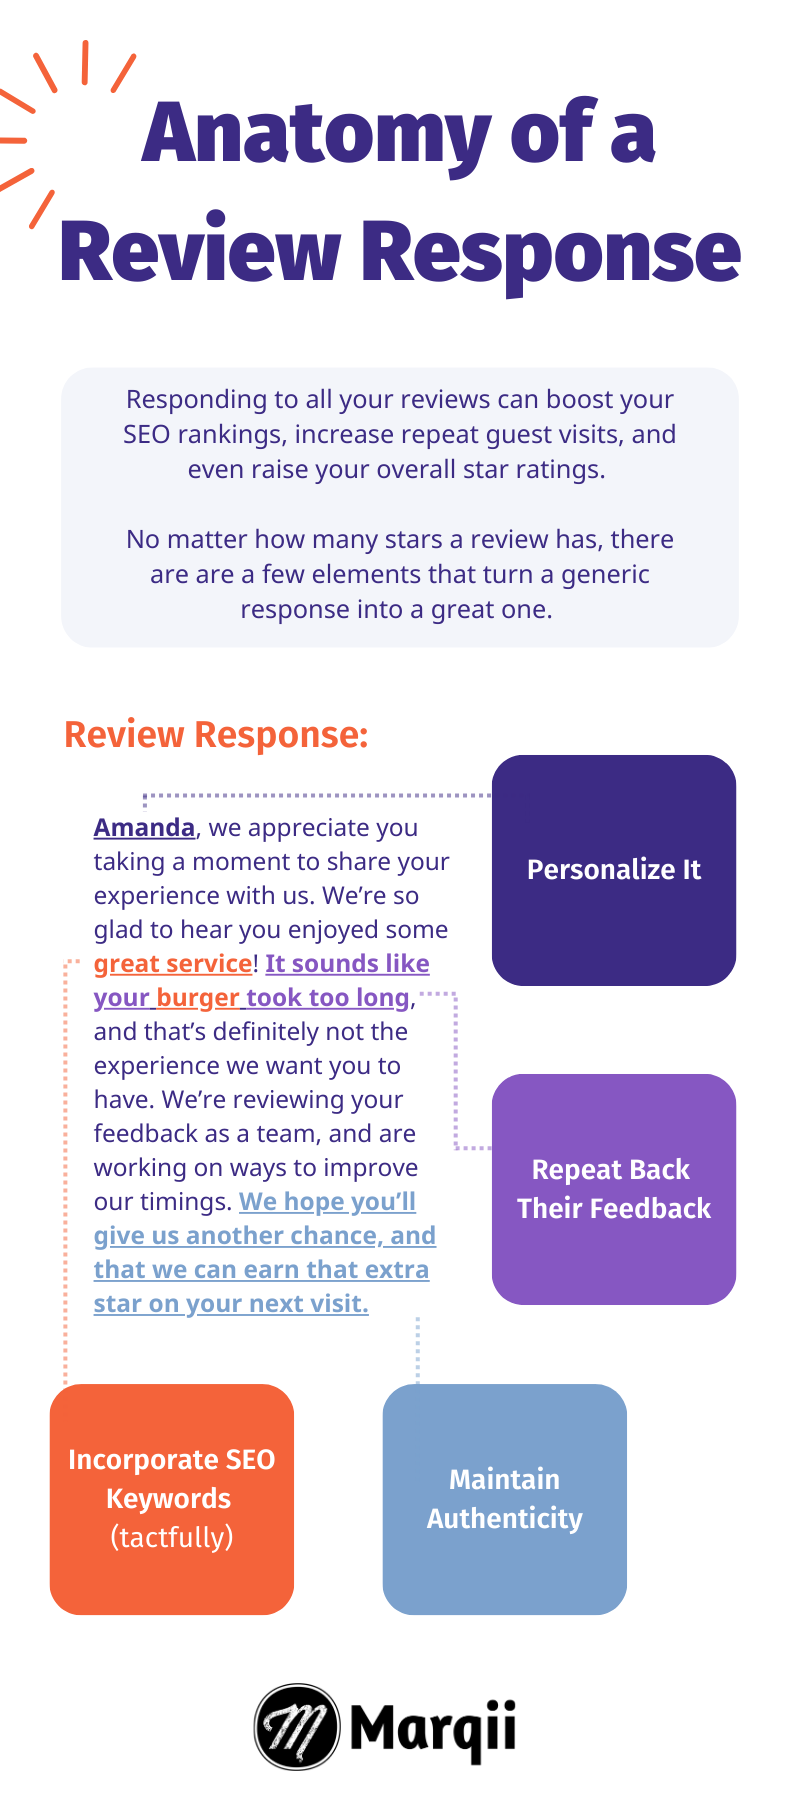 Anatomy of a Review Response: A Step-by-Step Guide to Managing Guest Reviews & Feedback